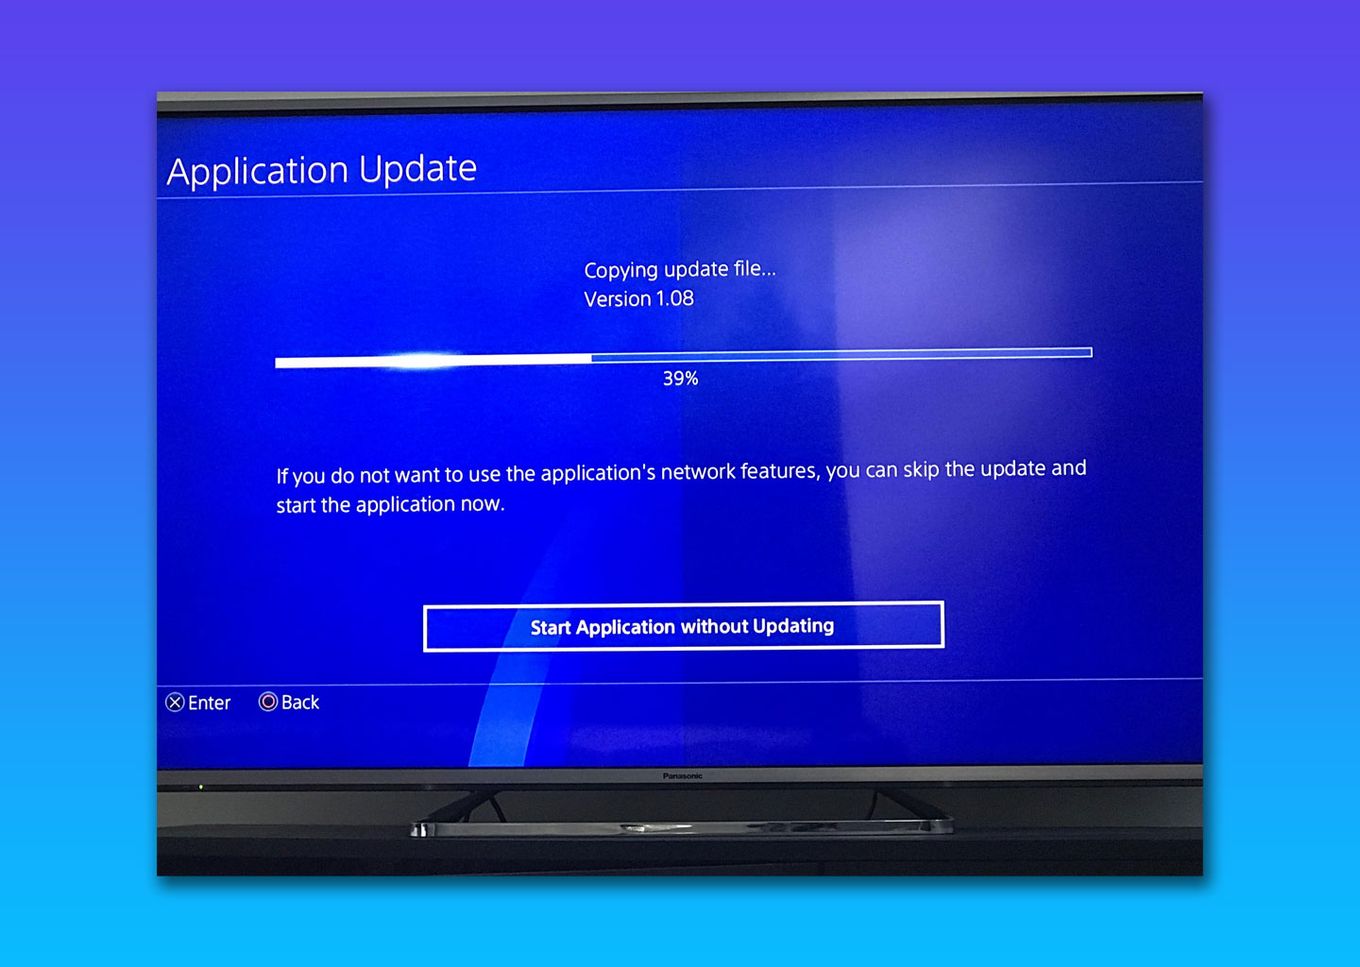 How To Get PS4 To Download While In Rest Mode 